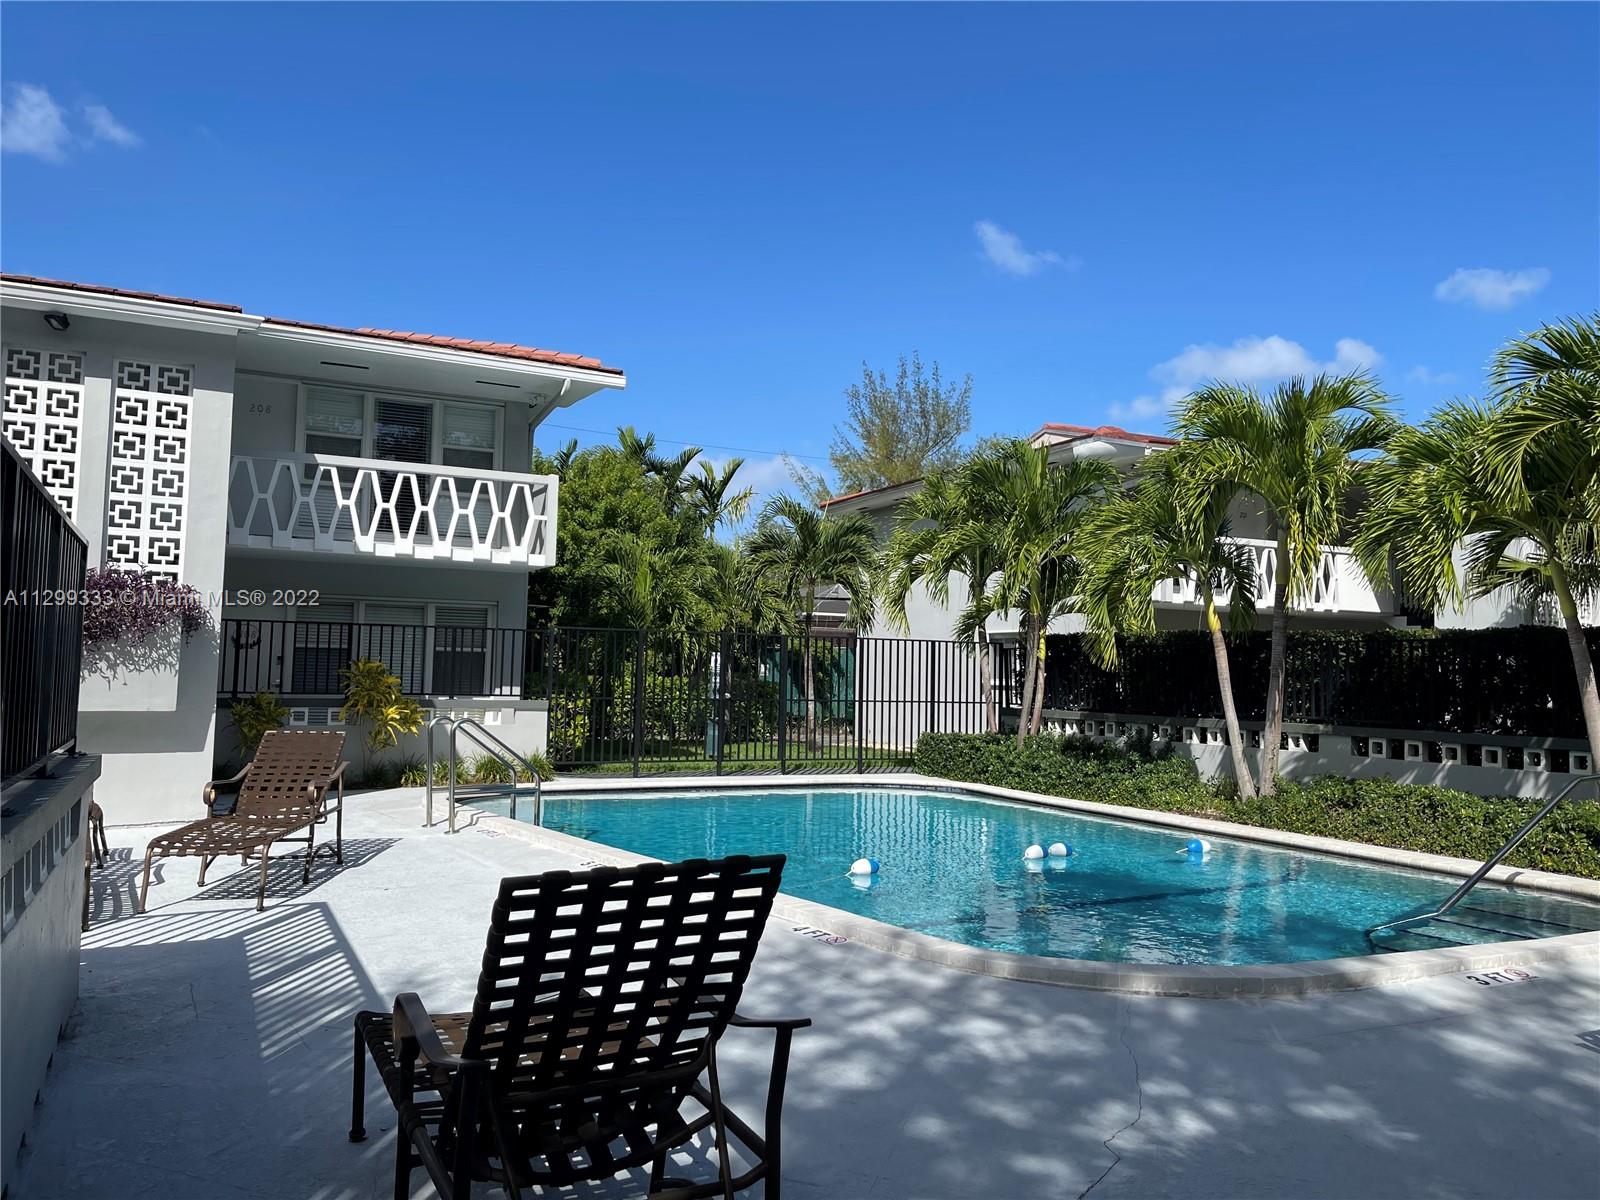 Bikers &  hikers dream. Rarely available 300K, lowest price per square foot in Gables/Grove 1st floor condo on prestigious Edgewater Dr. Walk out to your pristine, sunny pool, hop on your bike & enjoy 12 miles of gorgeous paths from Deering Estate to Downtown Miami. Close to University of Miami,  perfectly situated where Coconut Grove and Coral Gables meet! Bright and full of light! 1 assigned parking. Buy for yourself or rent for up to $2,500 a month.. Stress free living, maintenance includes all exterior insurance, water/sewer, trash pickup. Electric is usually less than $60.00 a month. Dogs under 25lbs OK
Very very quiet small building on a safe tree lined street surrounded by multimillion dollar homes. Assessments are up to date and paid.